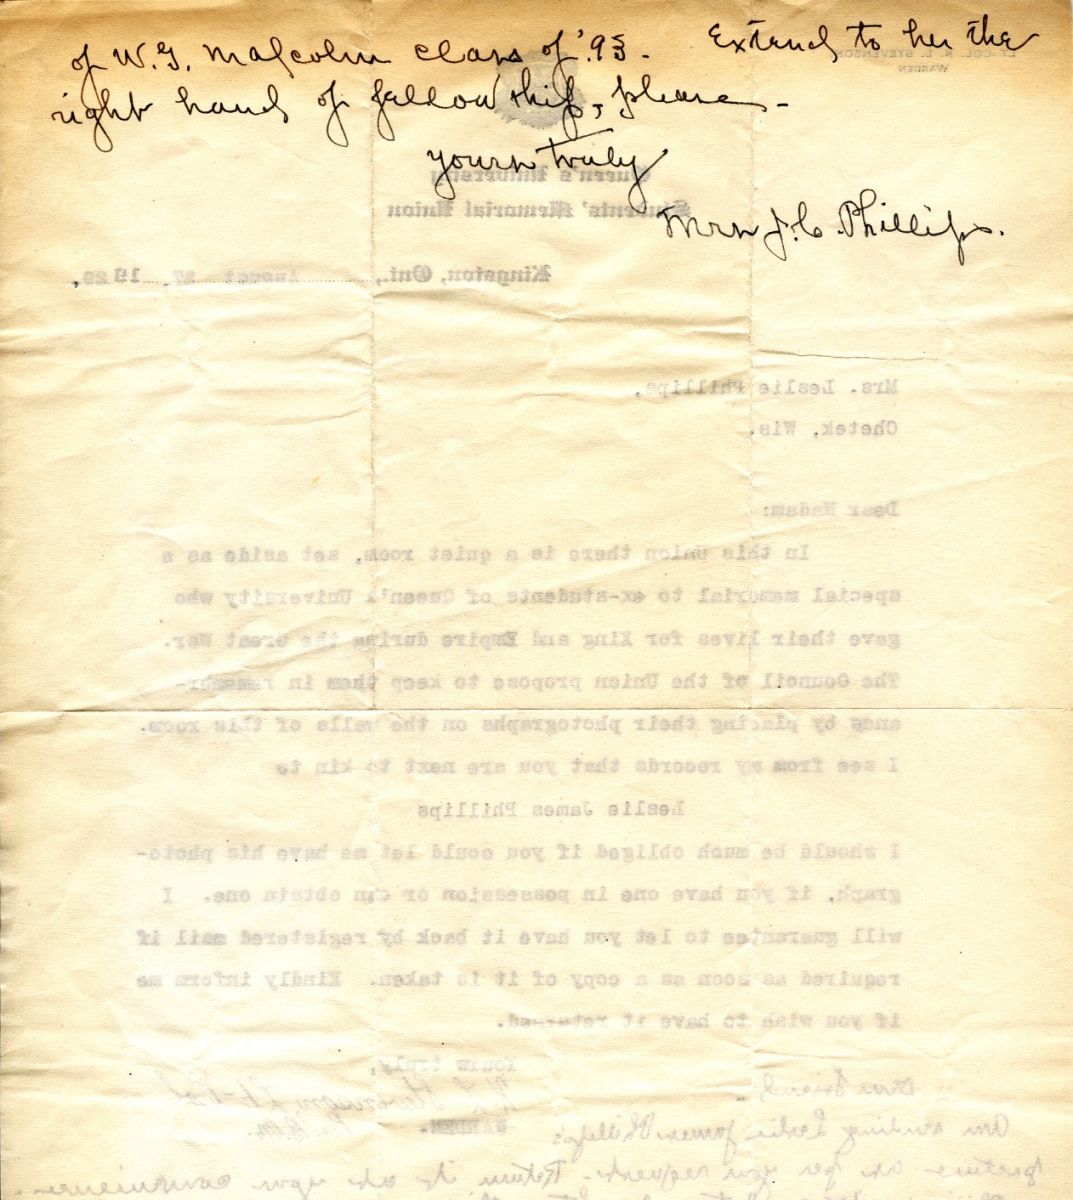 Letter from the Warden to Mrs. Leslie Phillips, 27th August 1929, Page 2